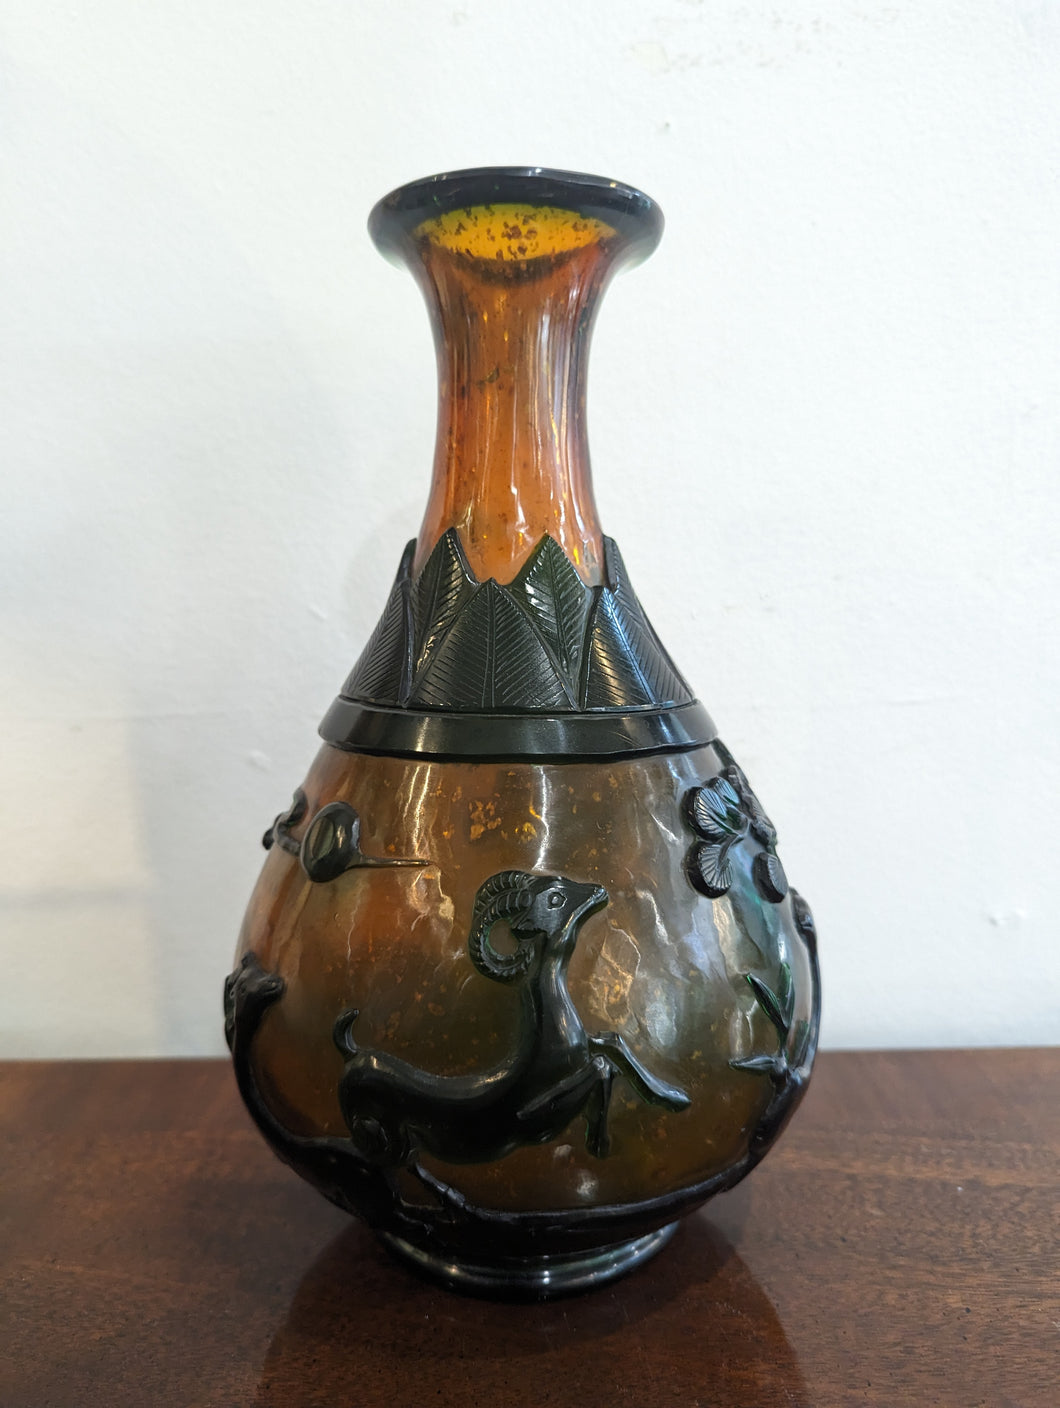 Green & Amber Chinese Hand Carved Cameo Glass Vase